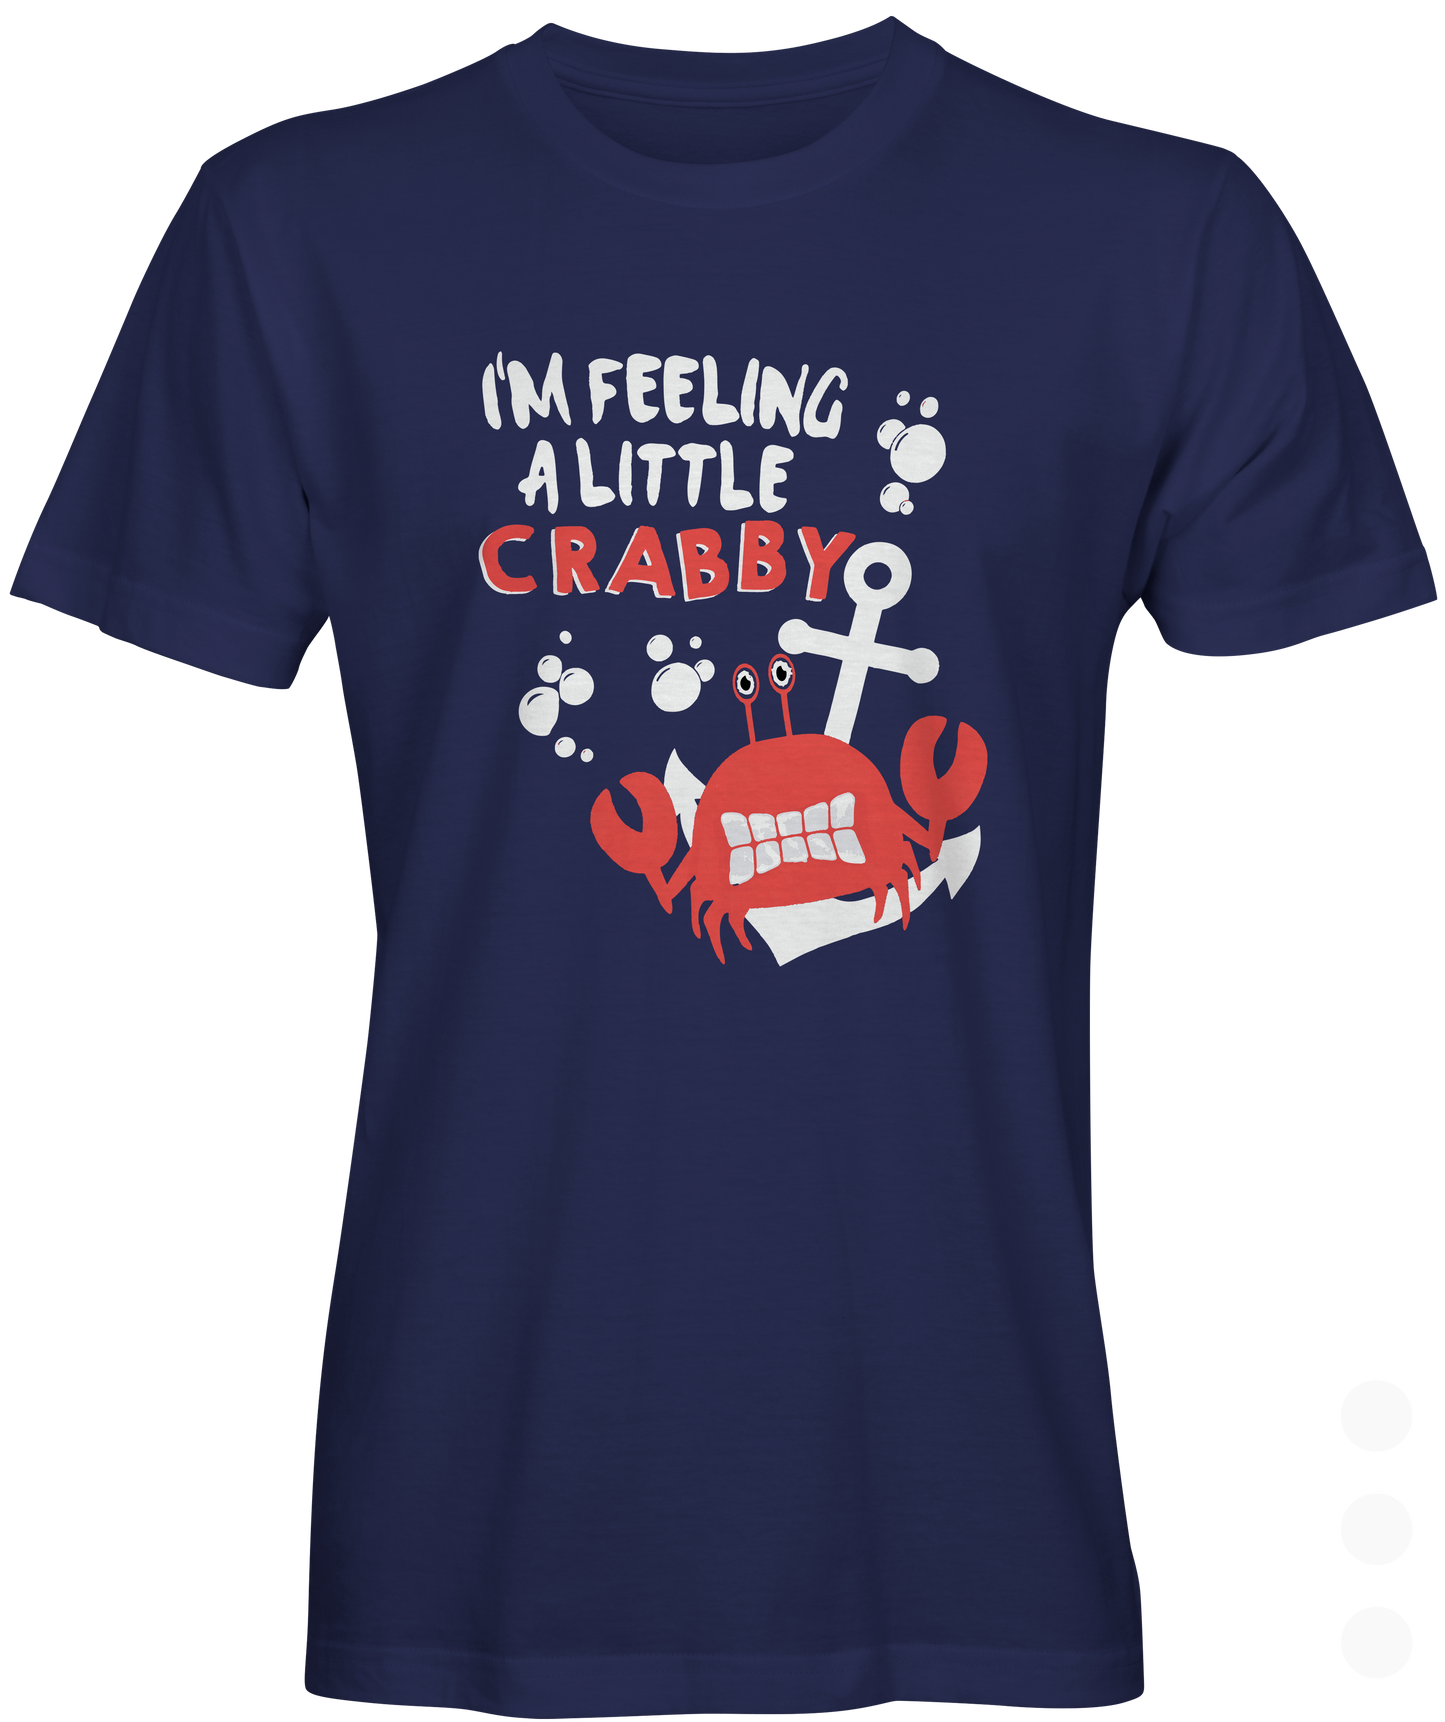 Navy Blue T-shirt with Crab